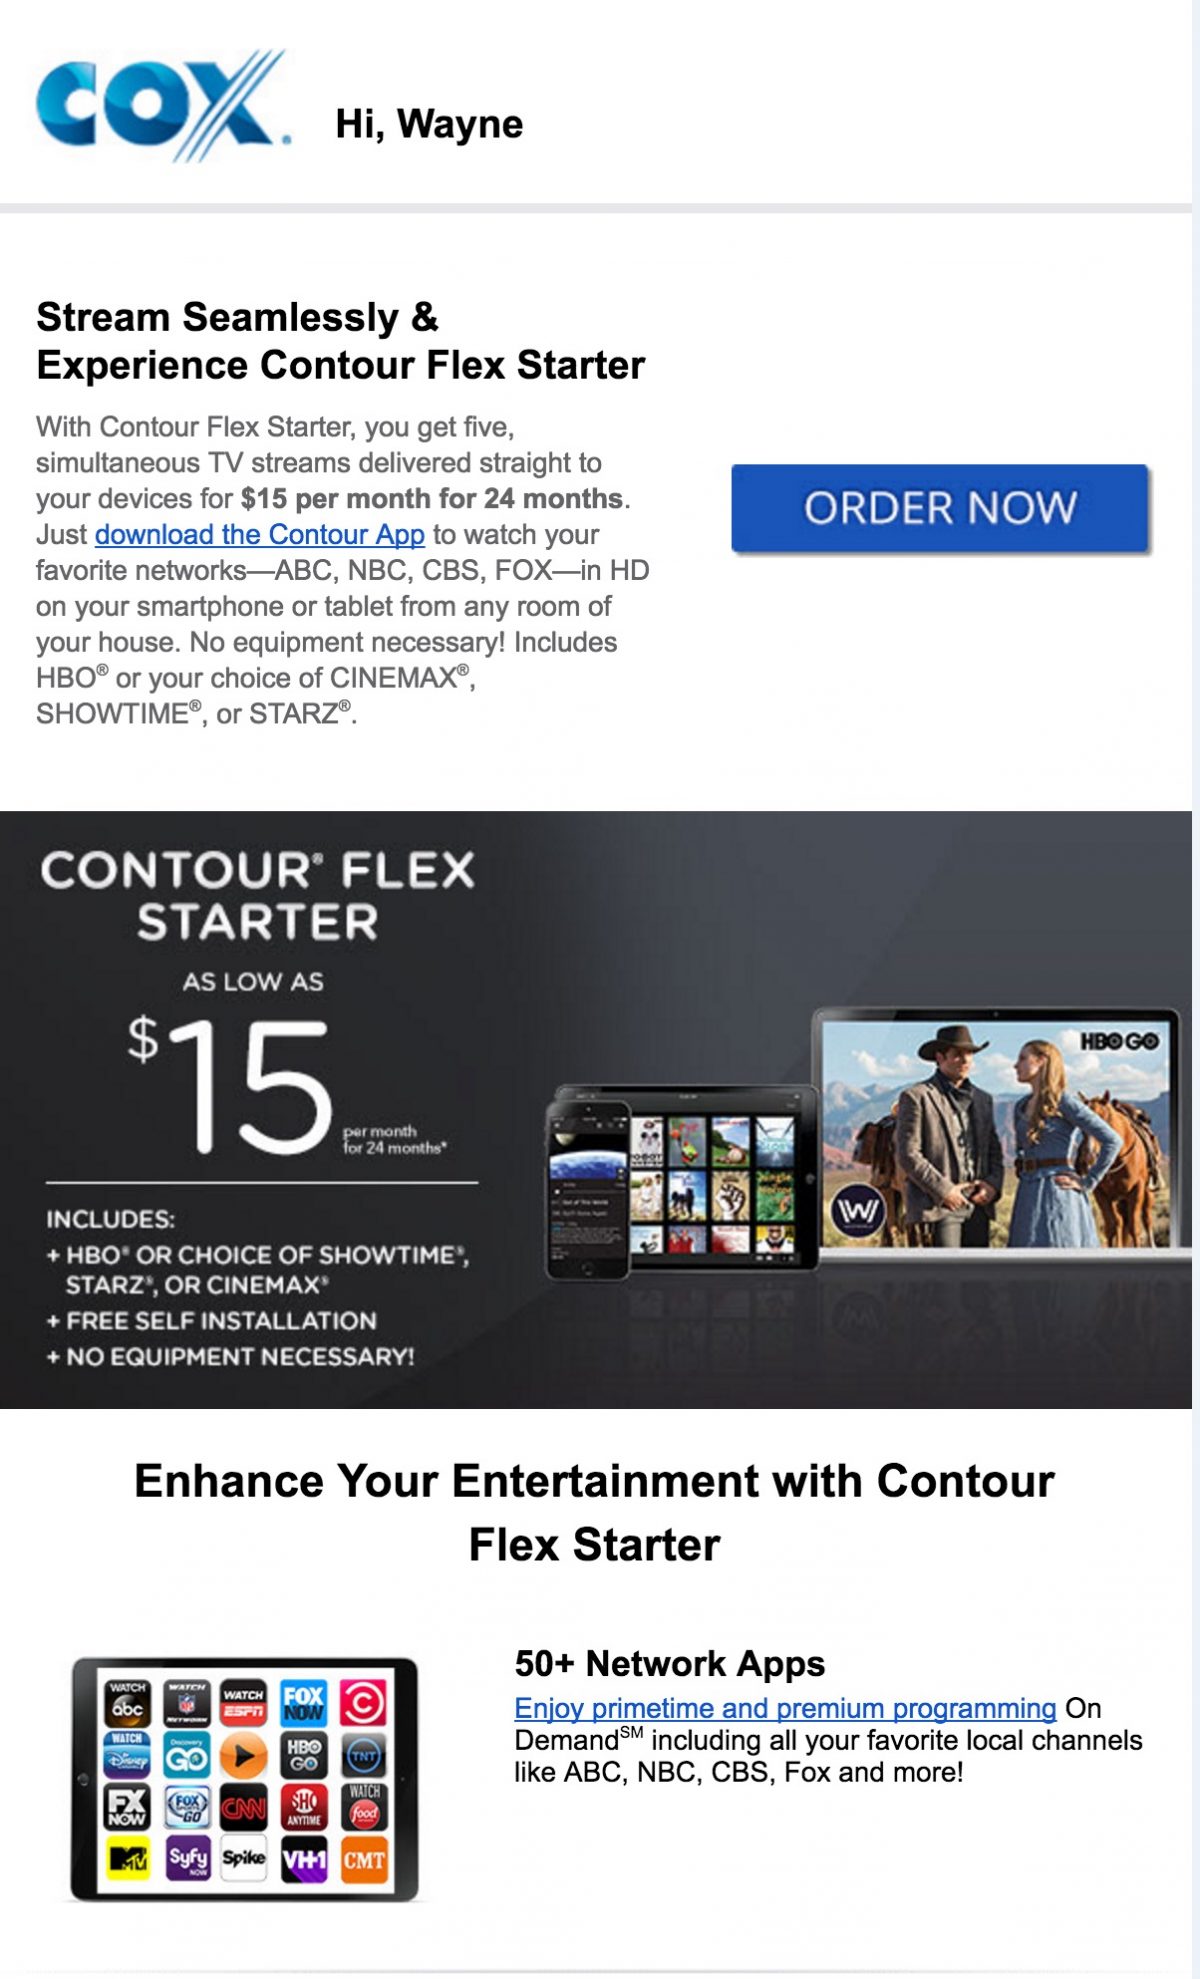 Cox Contour Flex Starter for $15/Mo Is the Skinny Bundle I've Been Waiting For